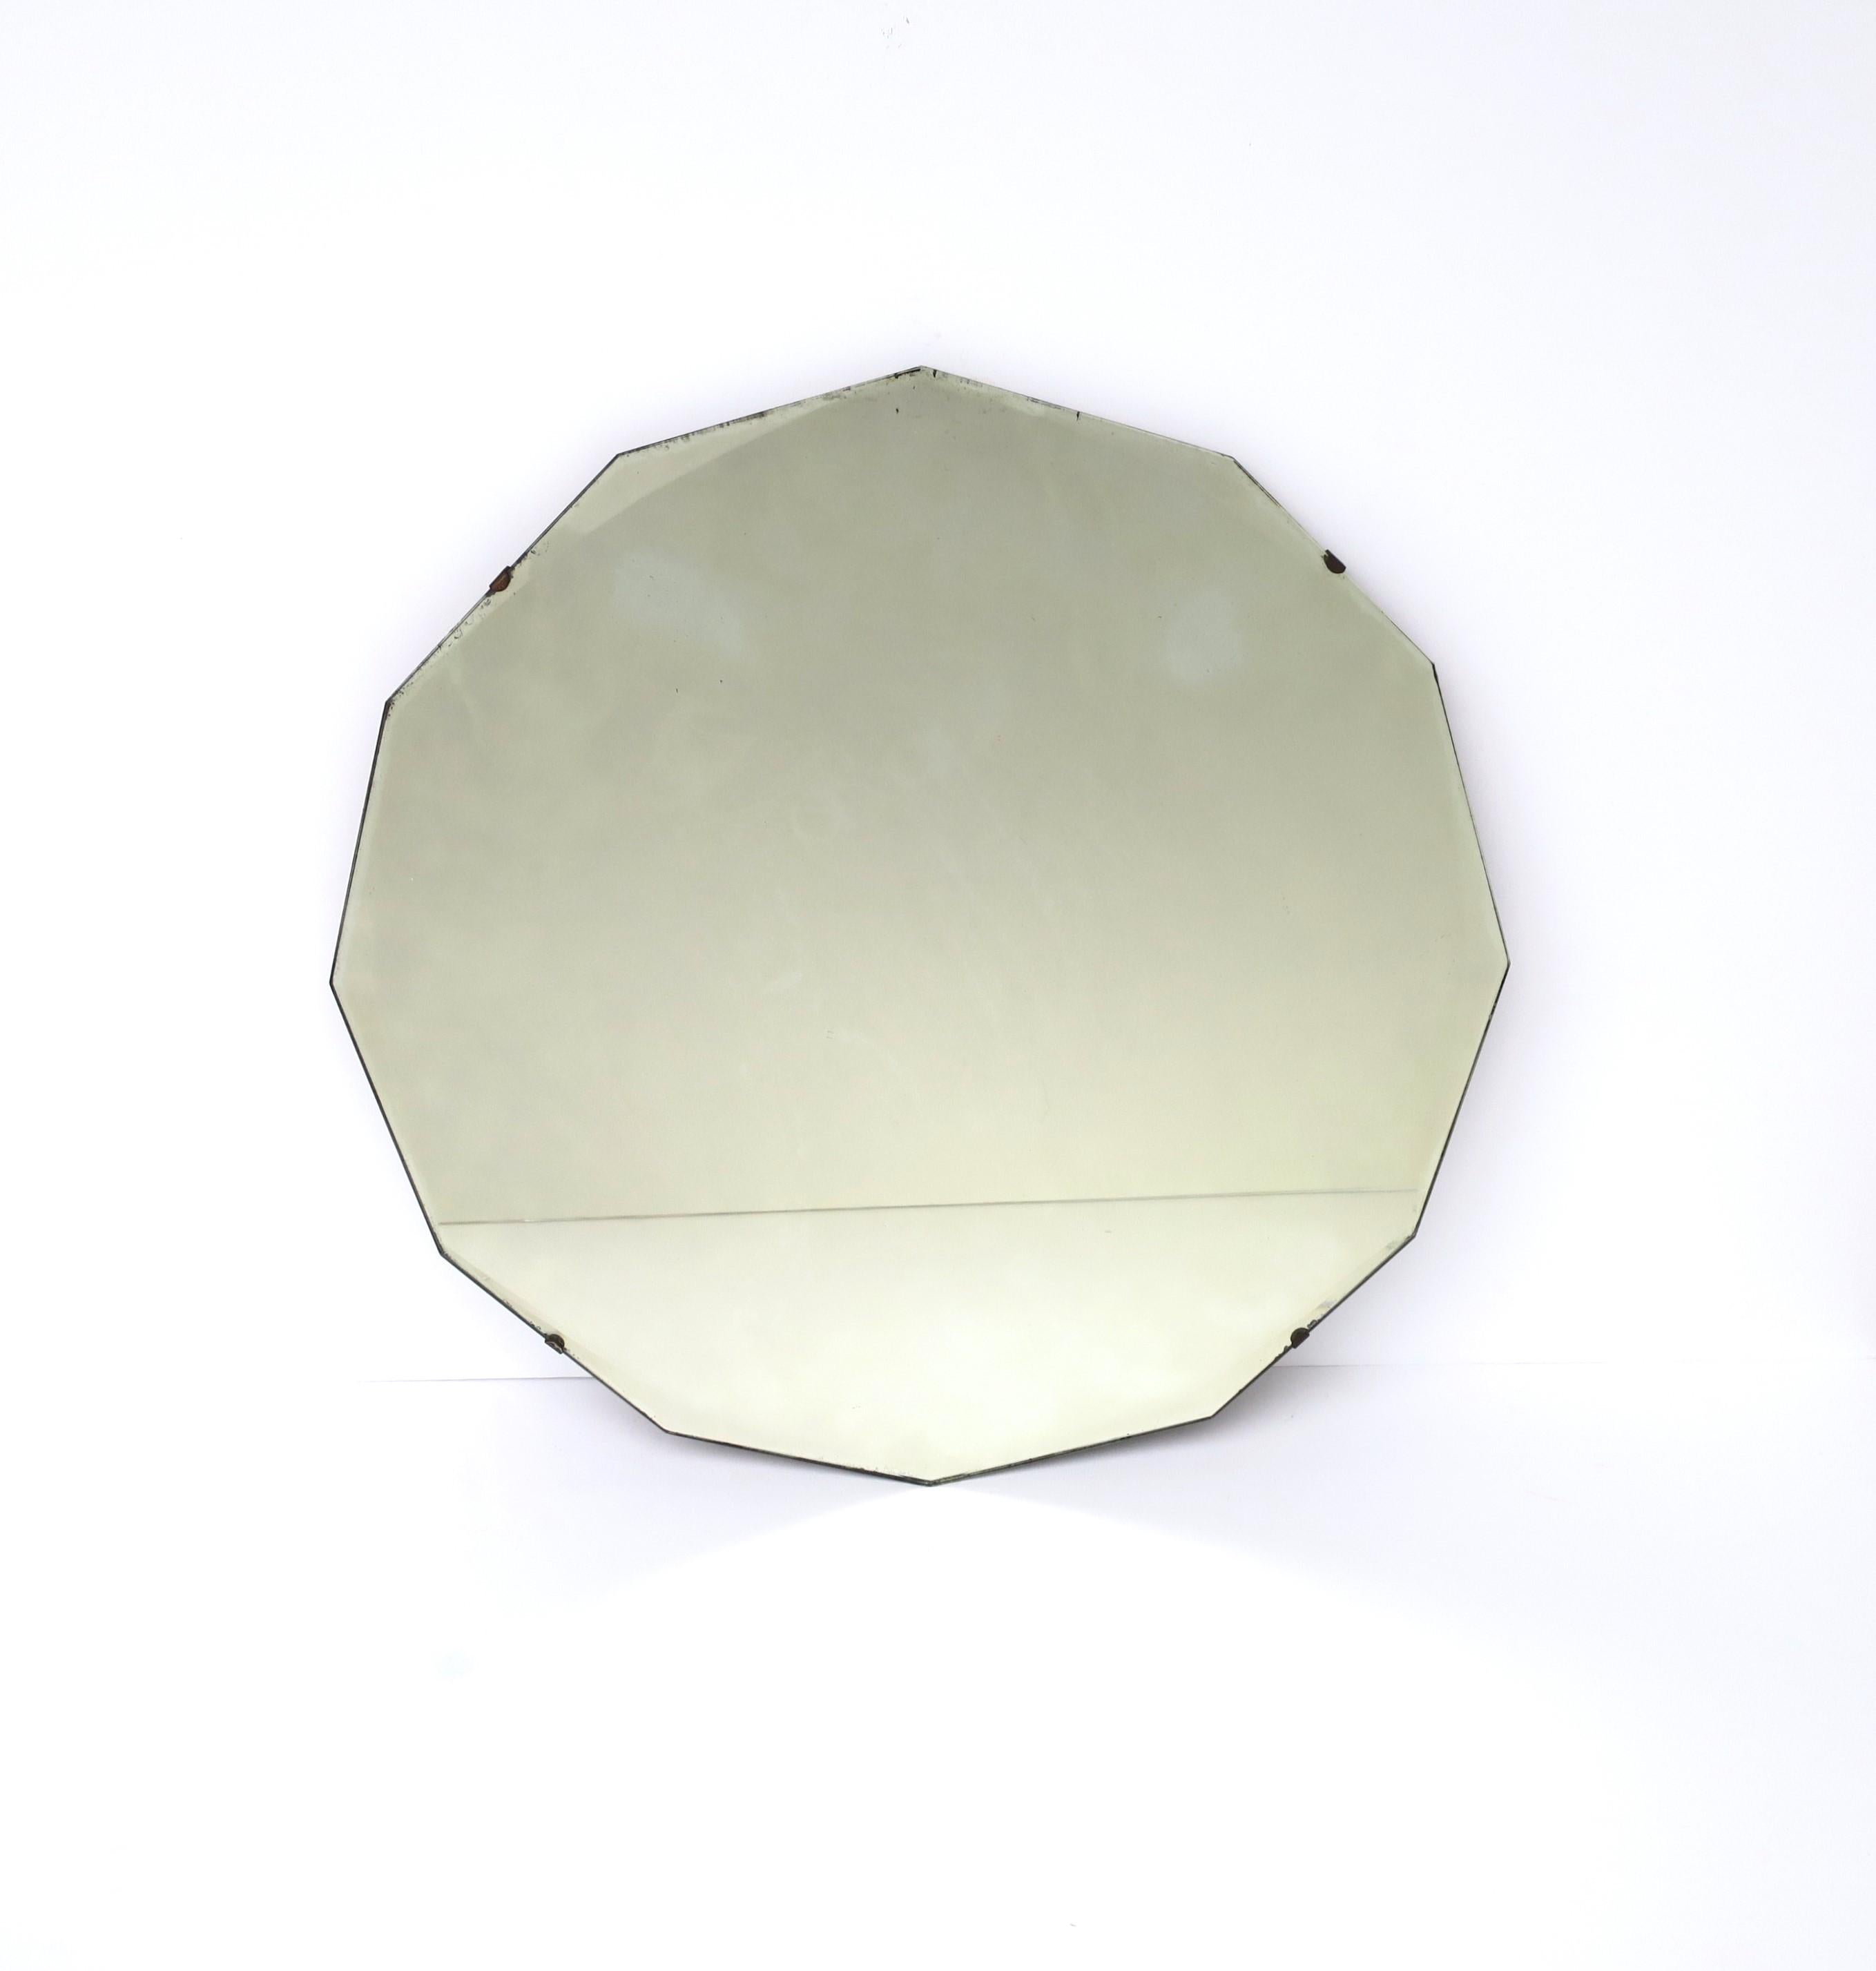 Mid-20th Century Round Beveled Glass Wall Mirror Hollywood Regency Style, circa 1940s For Sale